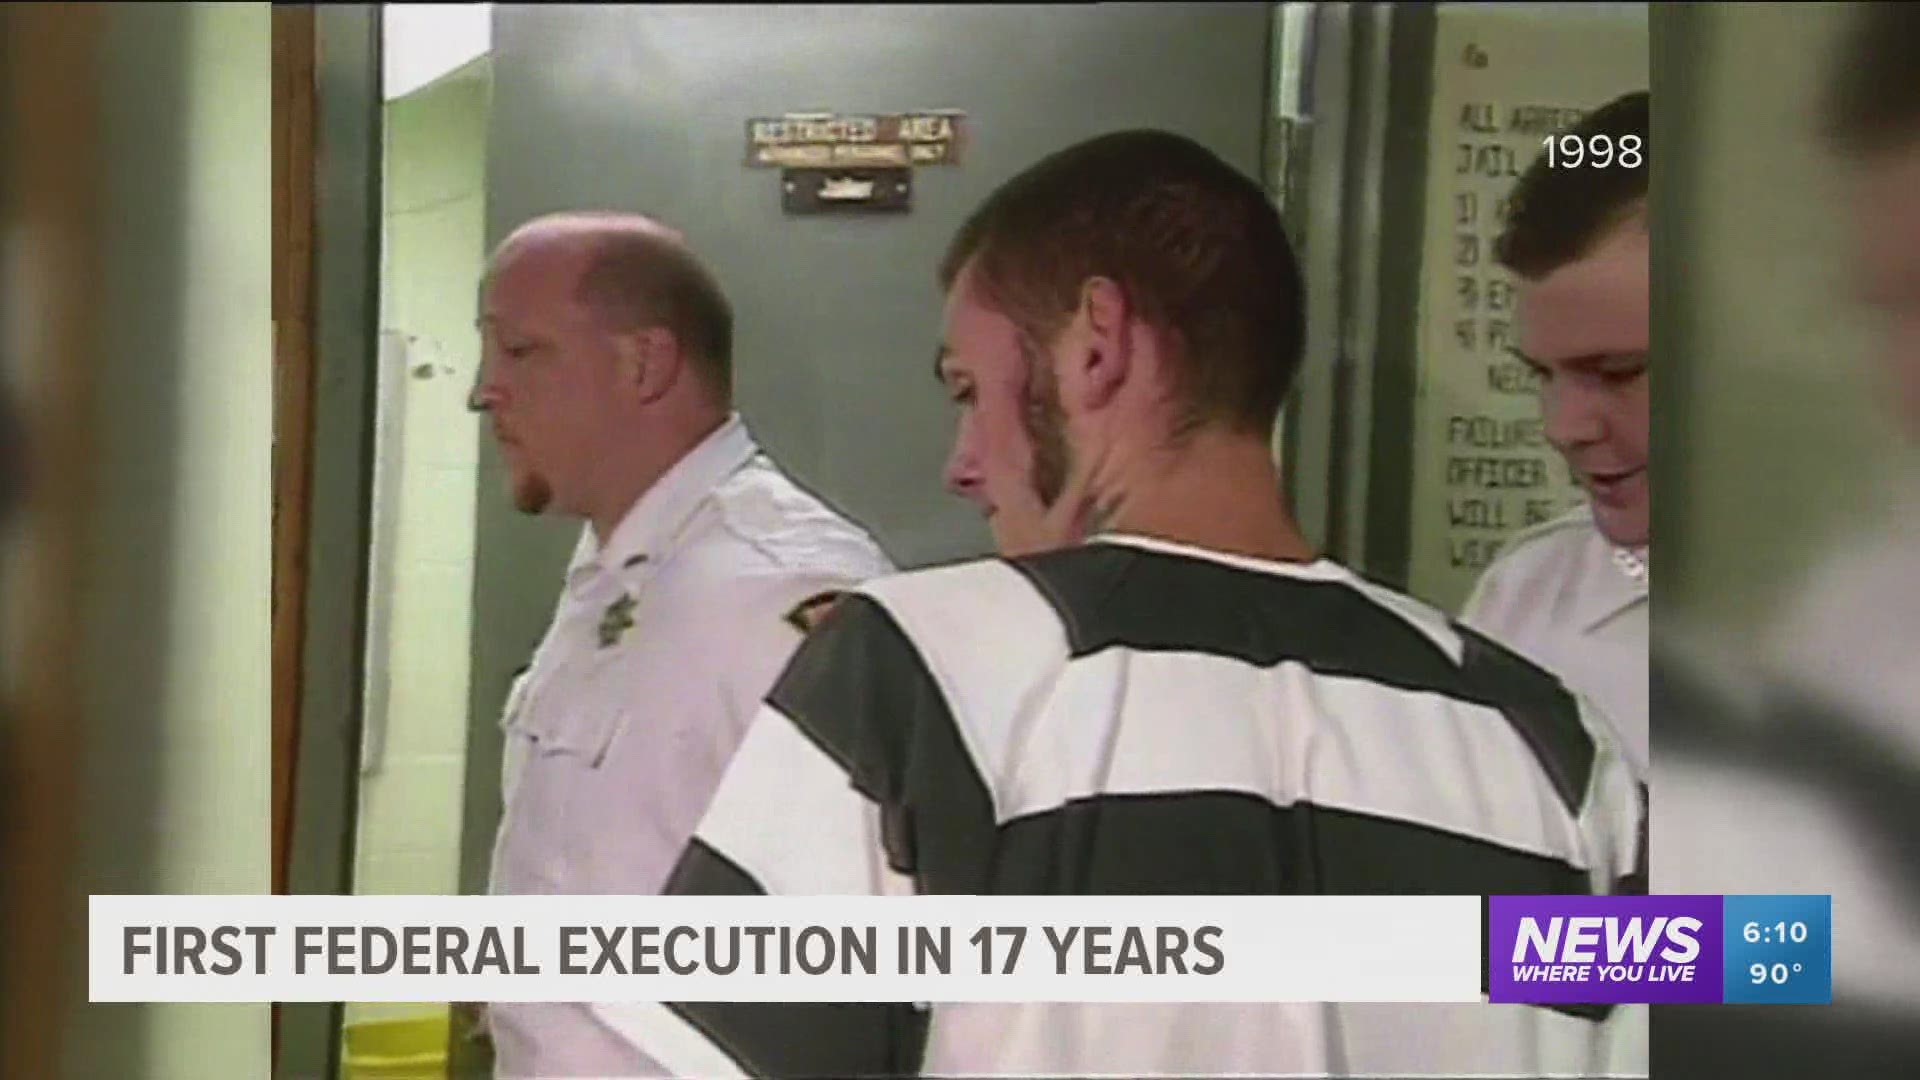 First federal execution in 17 years took place Tuesday